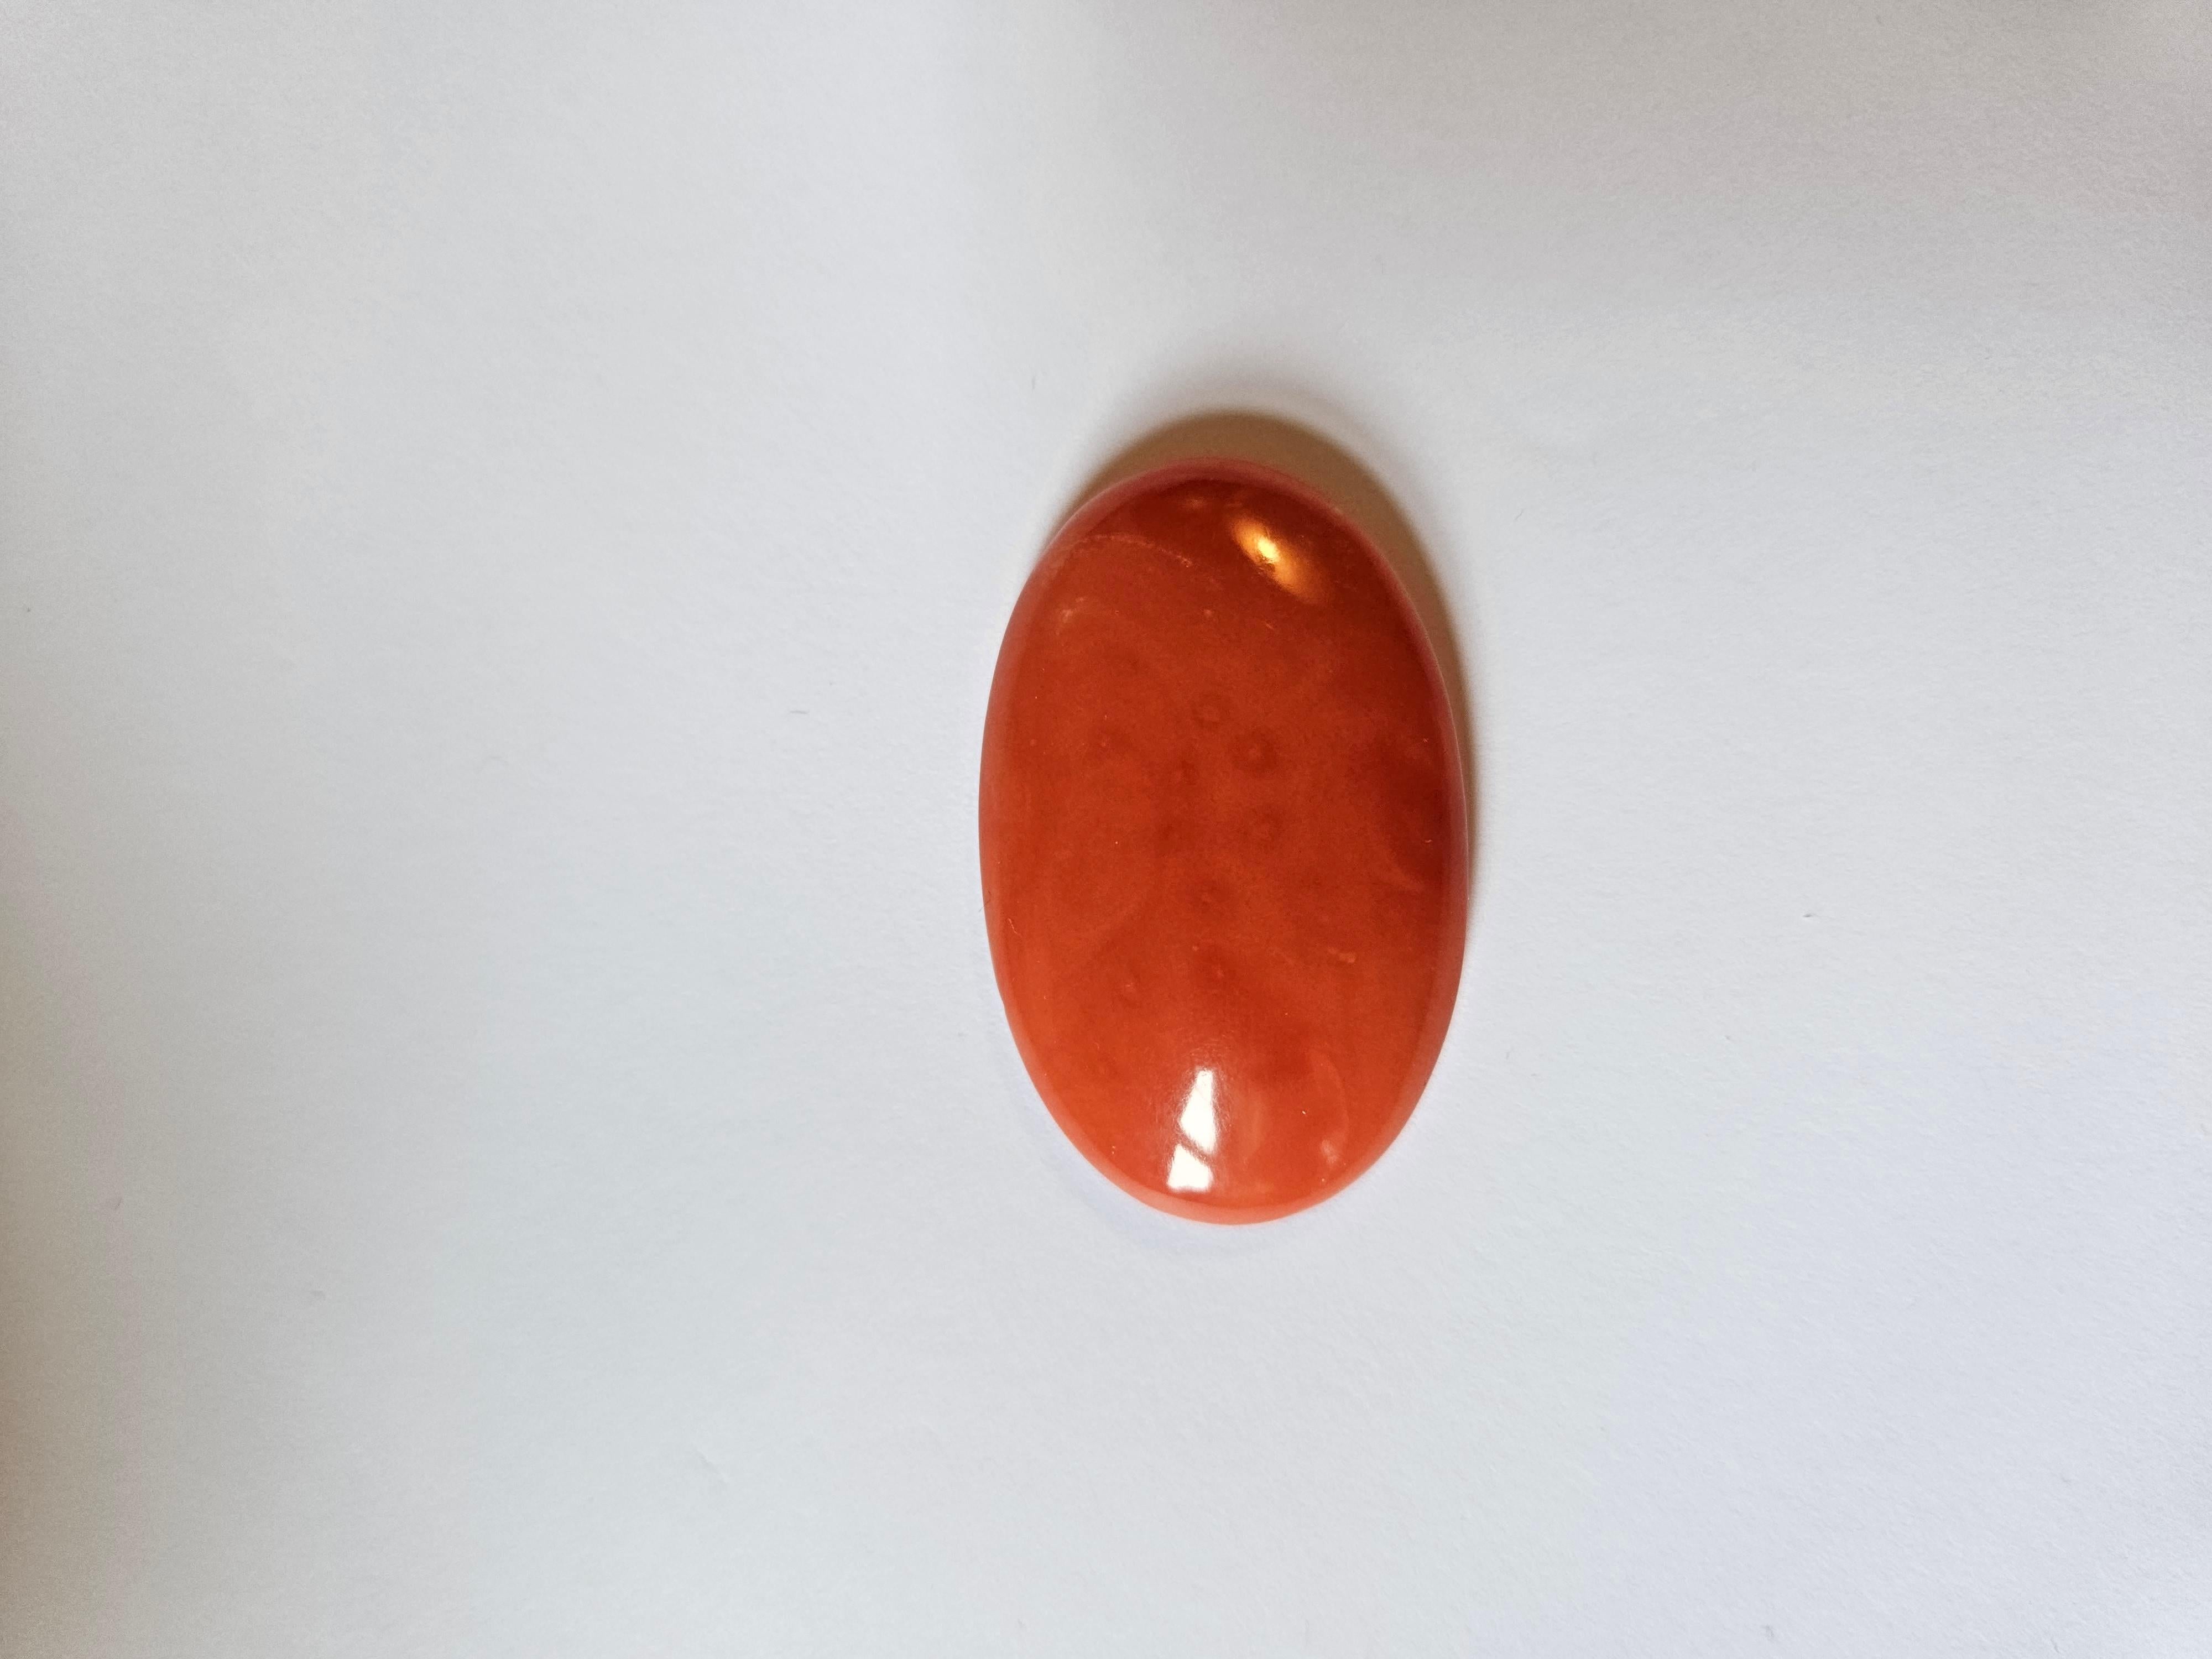 Introducing an exquisite gemstone that will leave you in awe! This gorgeous coral boasts a vivid pink orange color with a stunning oval shape, weighing 50.65 carats and comes with certification. The natural creation of this gemstone makes it even